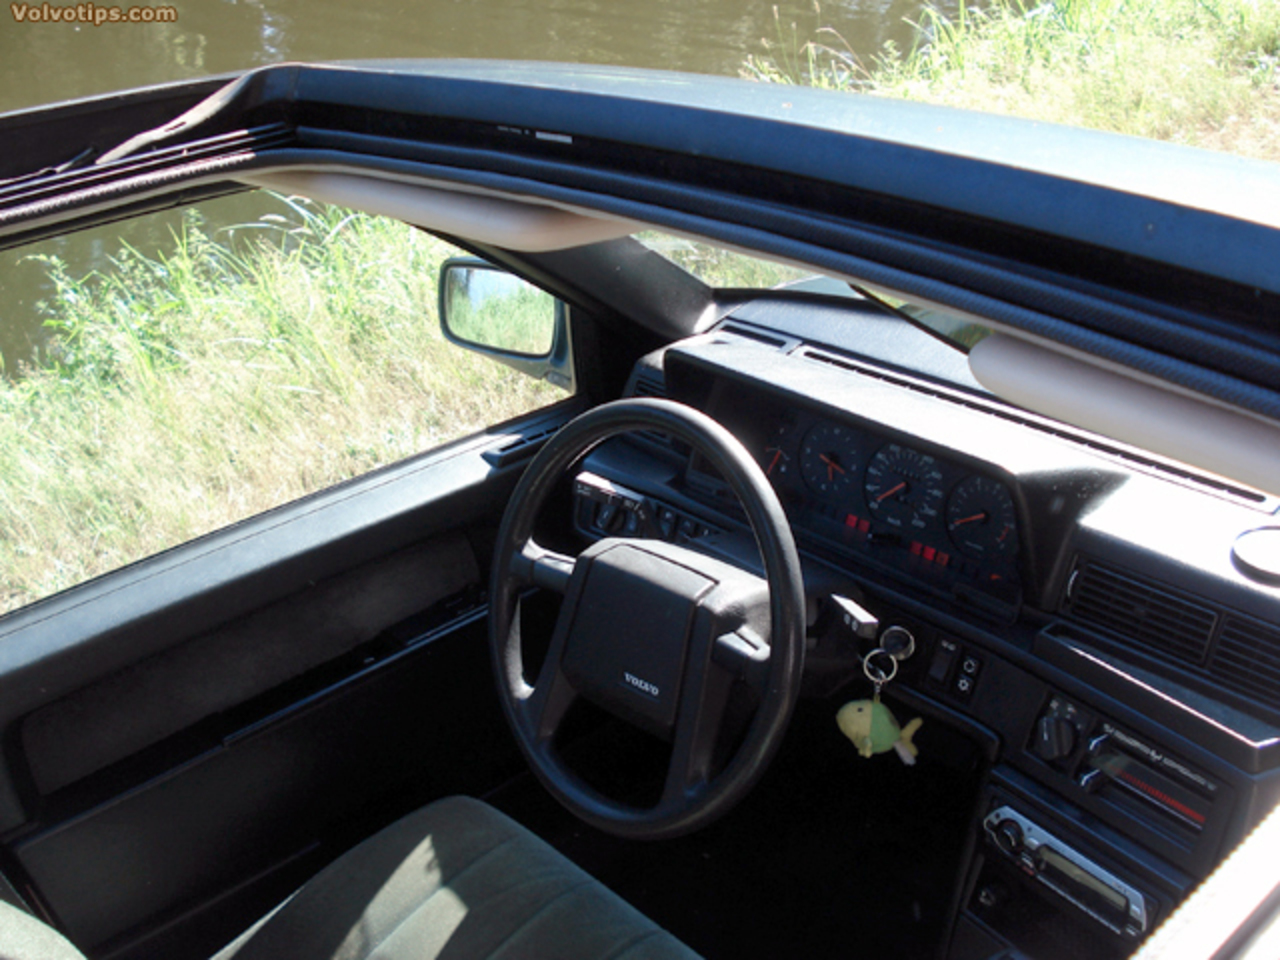 Volvo 740 GLE sunroof green. The 740 has a sunroof, one of the best